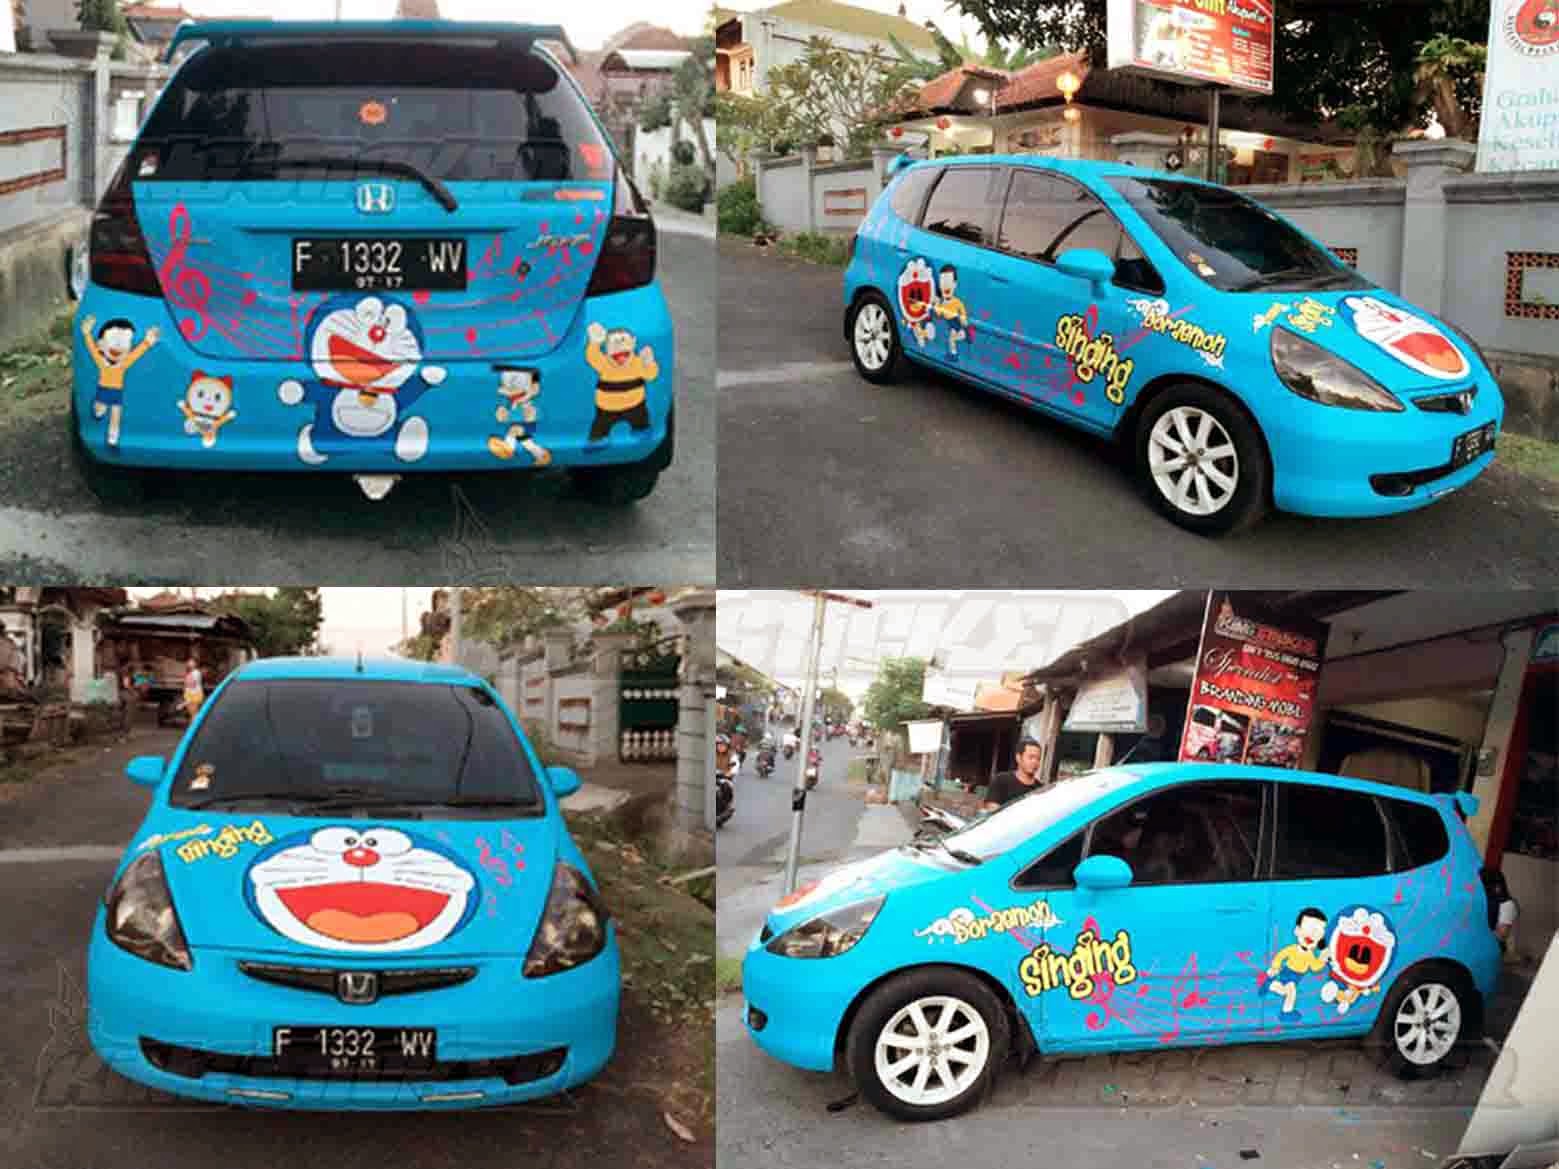 Gambar Cutting Sticker Mobil Mickey Mouse Duniaotto